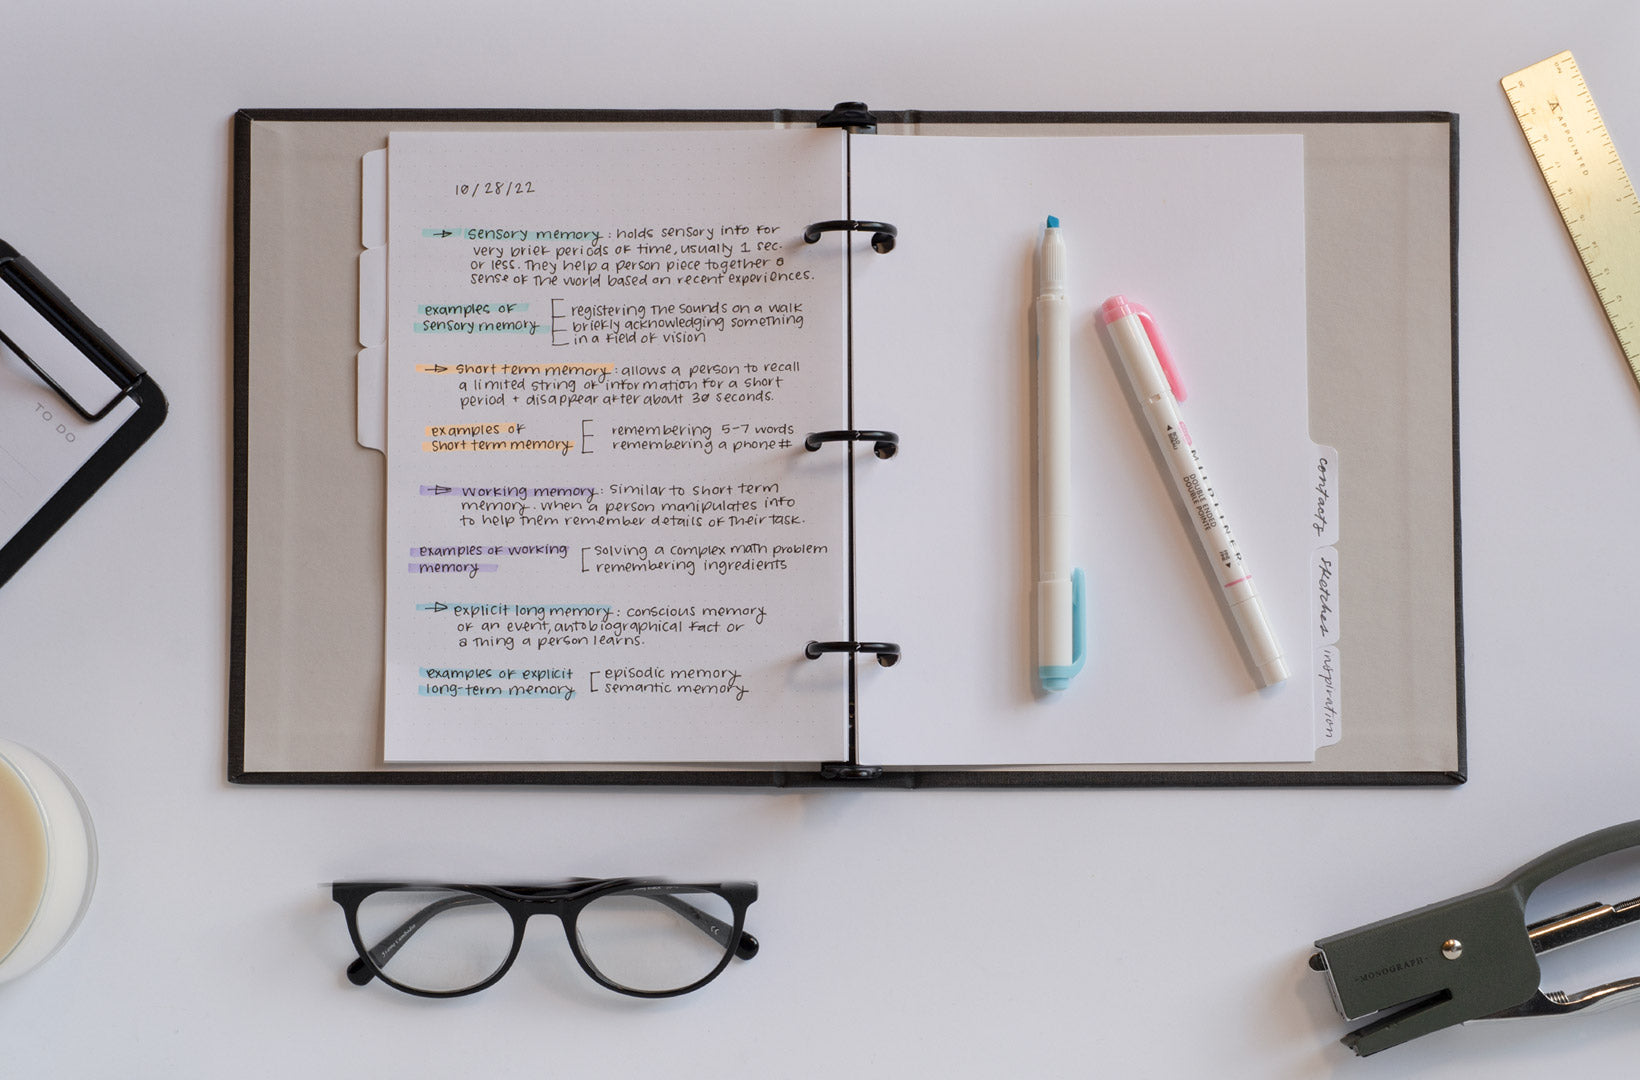 The Compact Binder lies open on a white desktop. Class notes are filled in on the left-hand side of the lined pages. Highlighters sit on top of the planner and other accessories are strewn to the side including a brass ruler, glasses, and mini clipboard